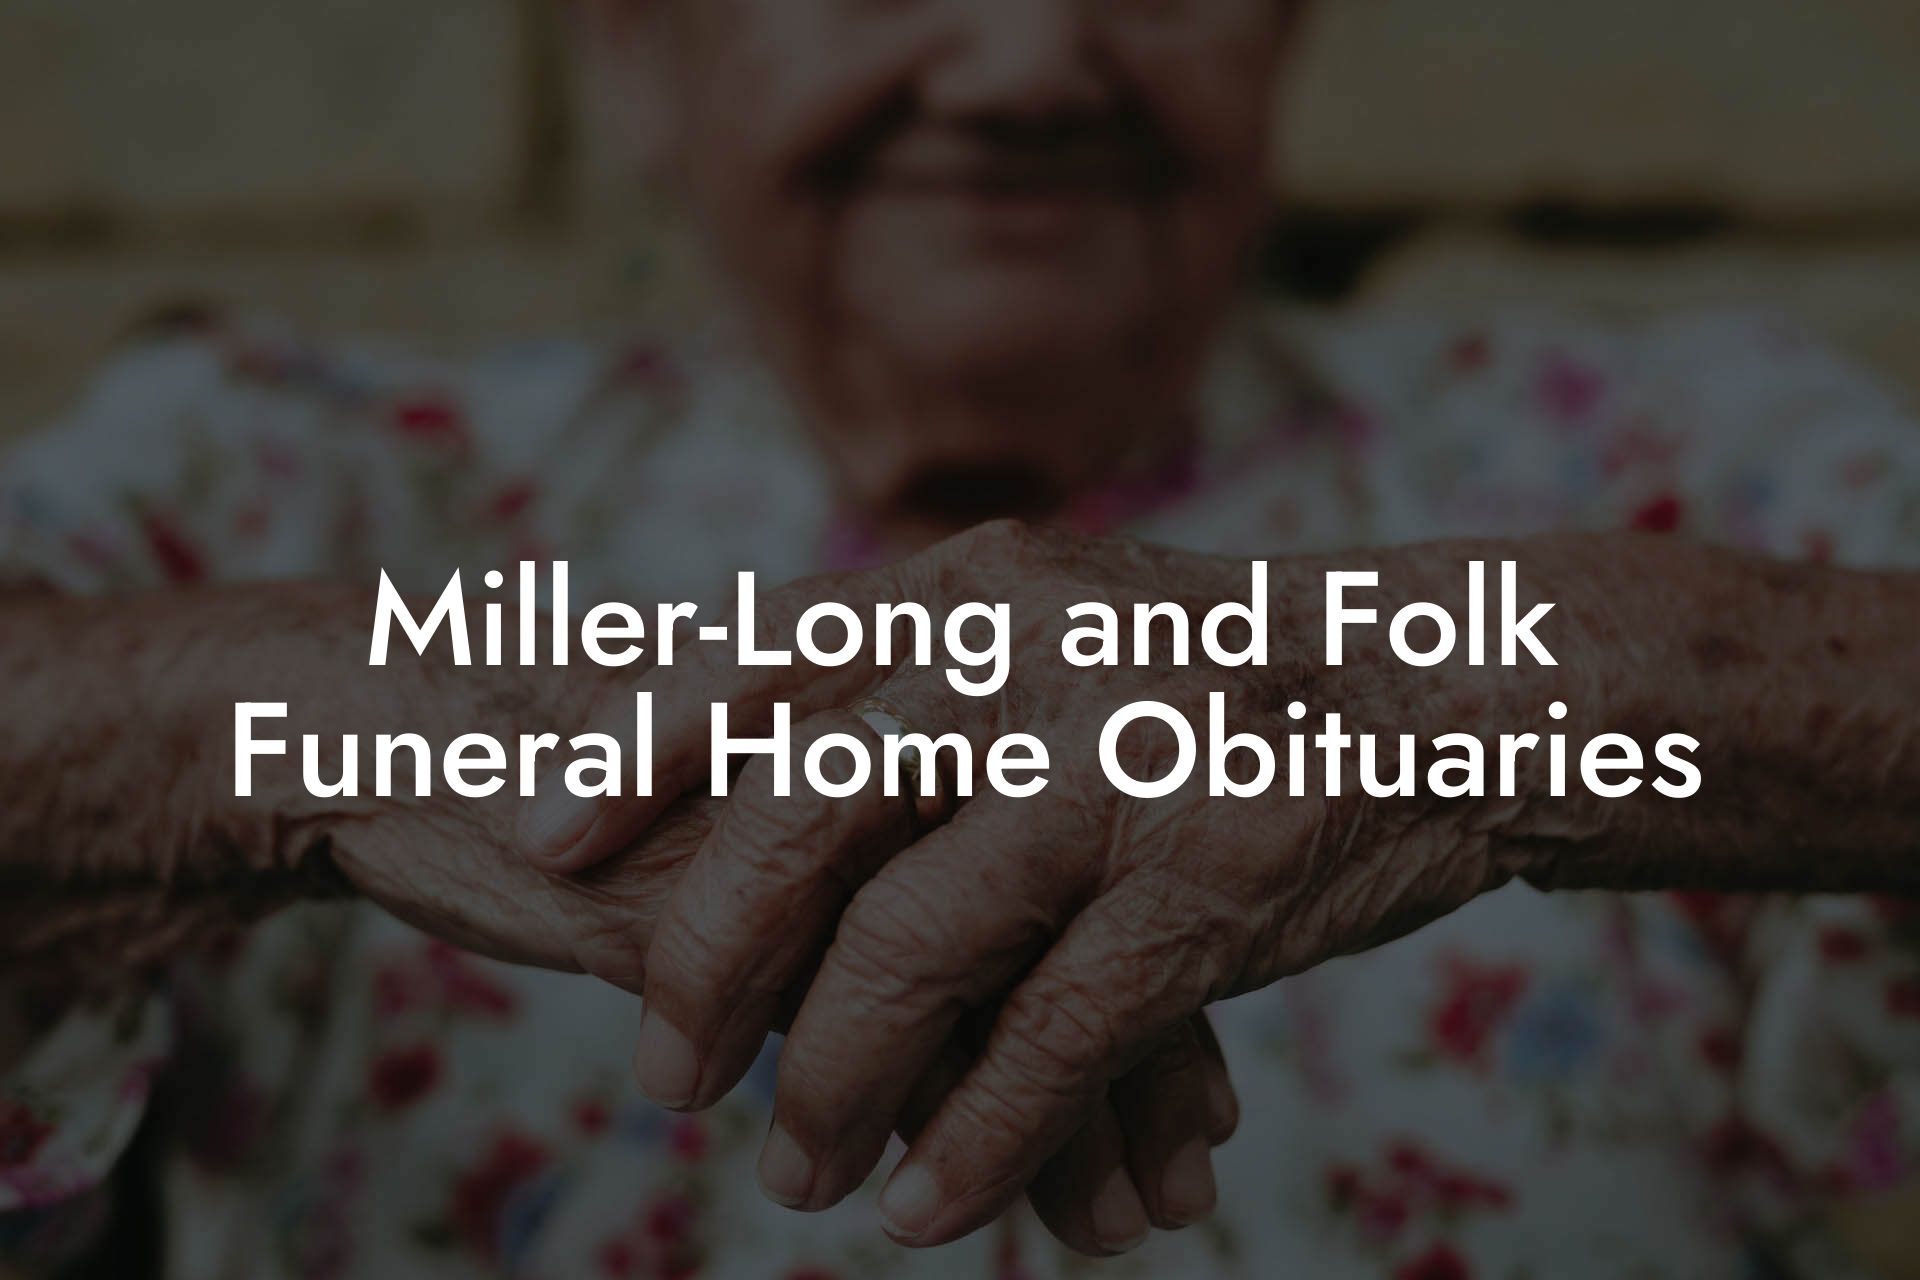 Miller-Long and Folk Funeral Home Obituaries